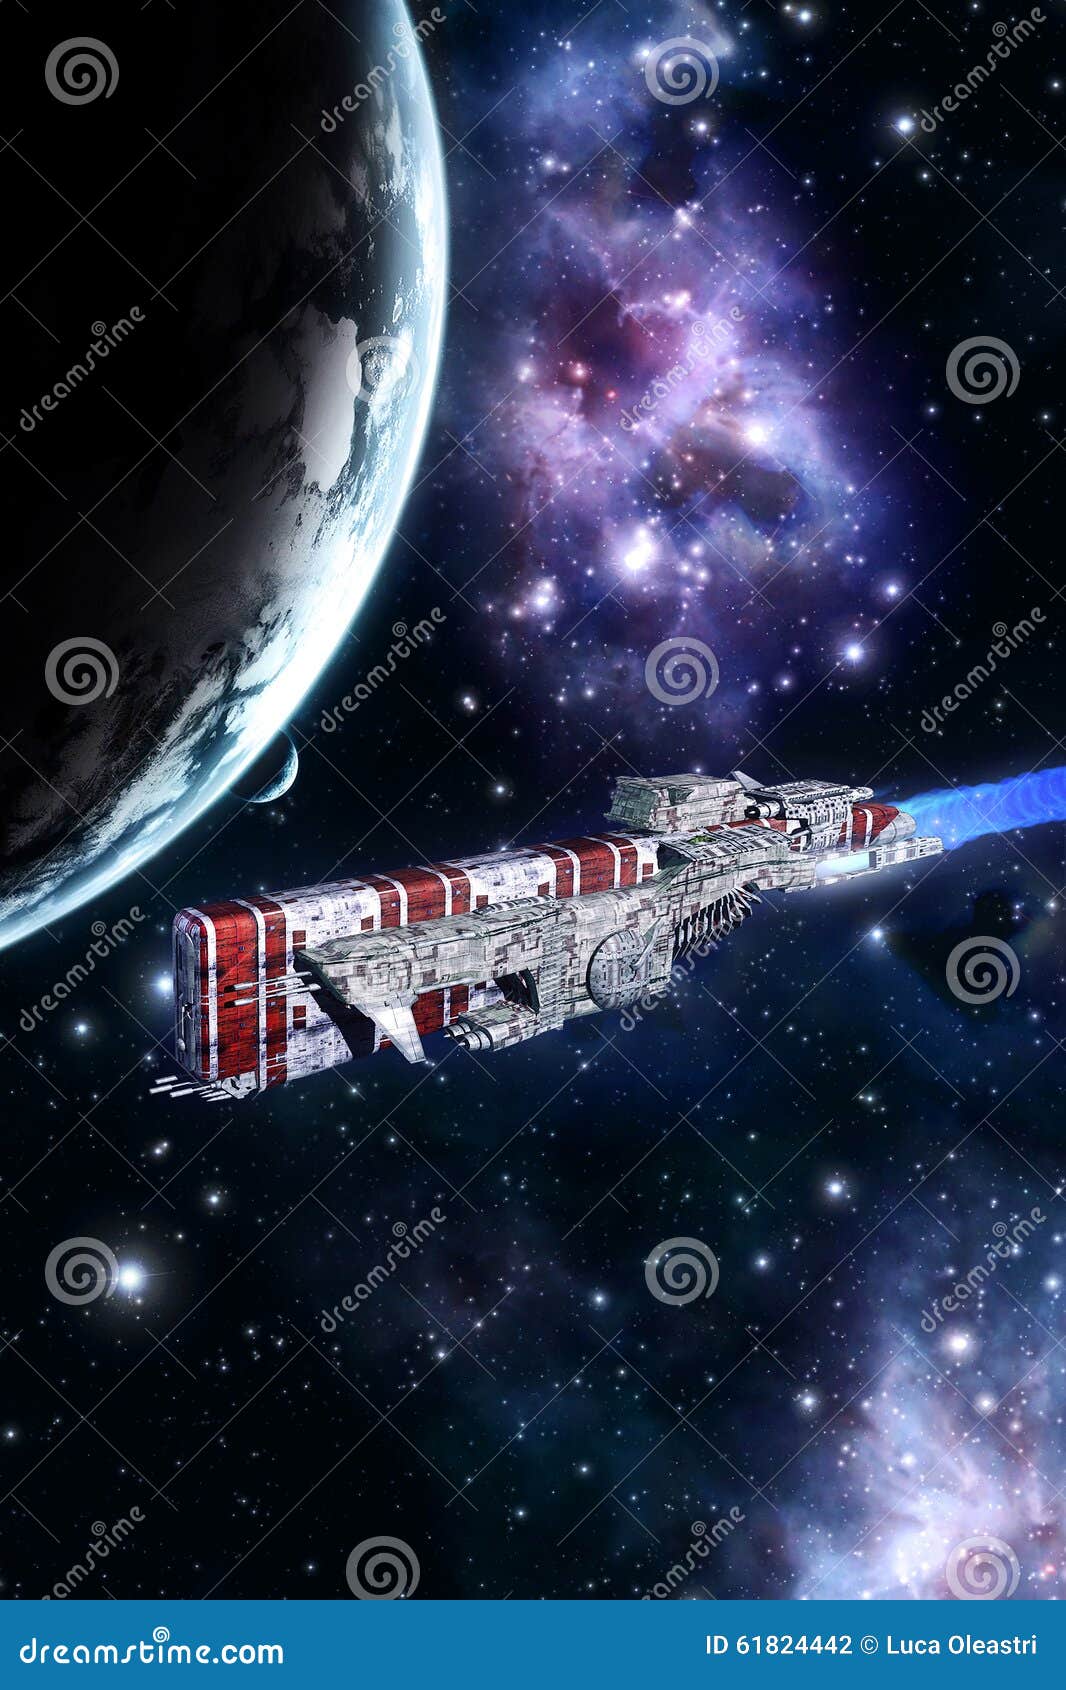 space battleship and planet